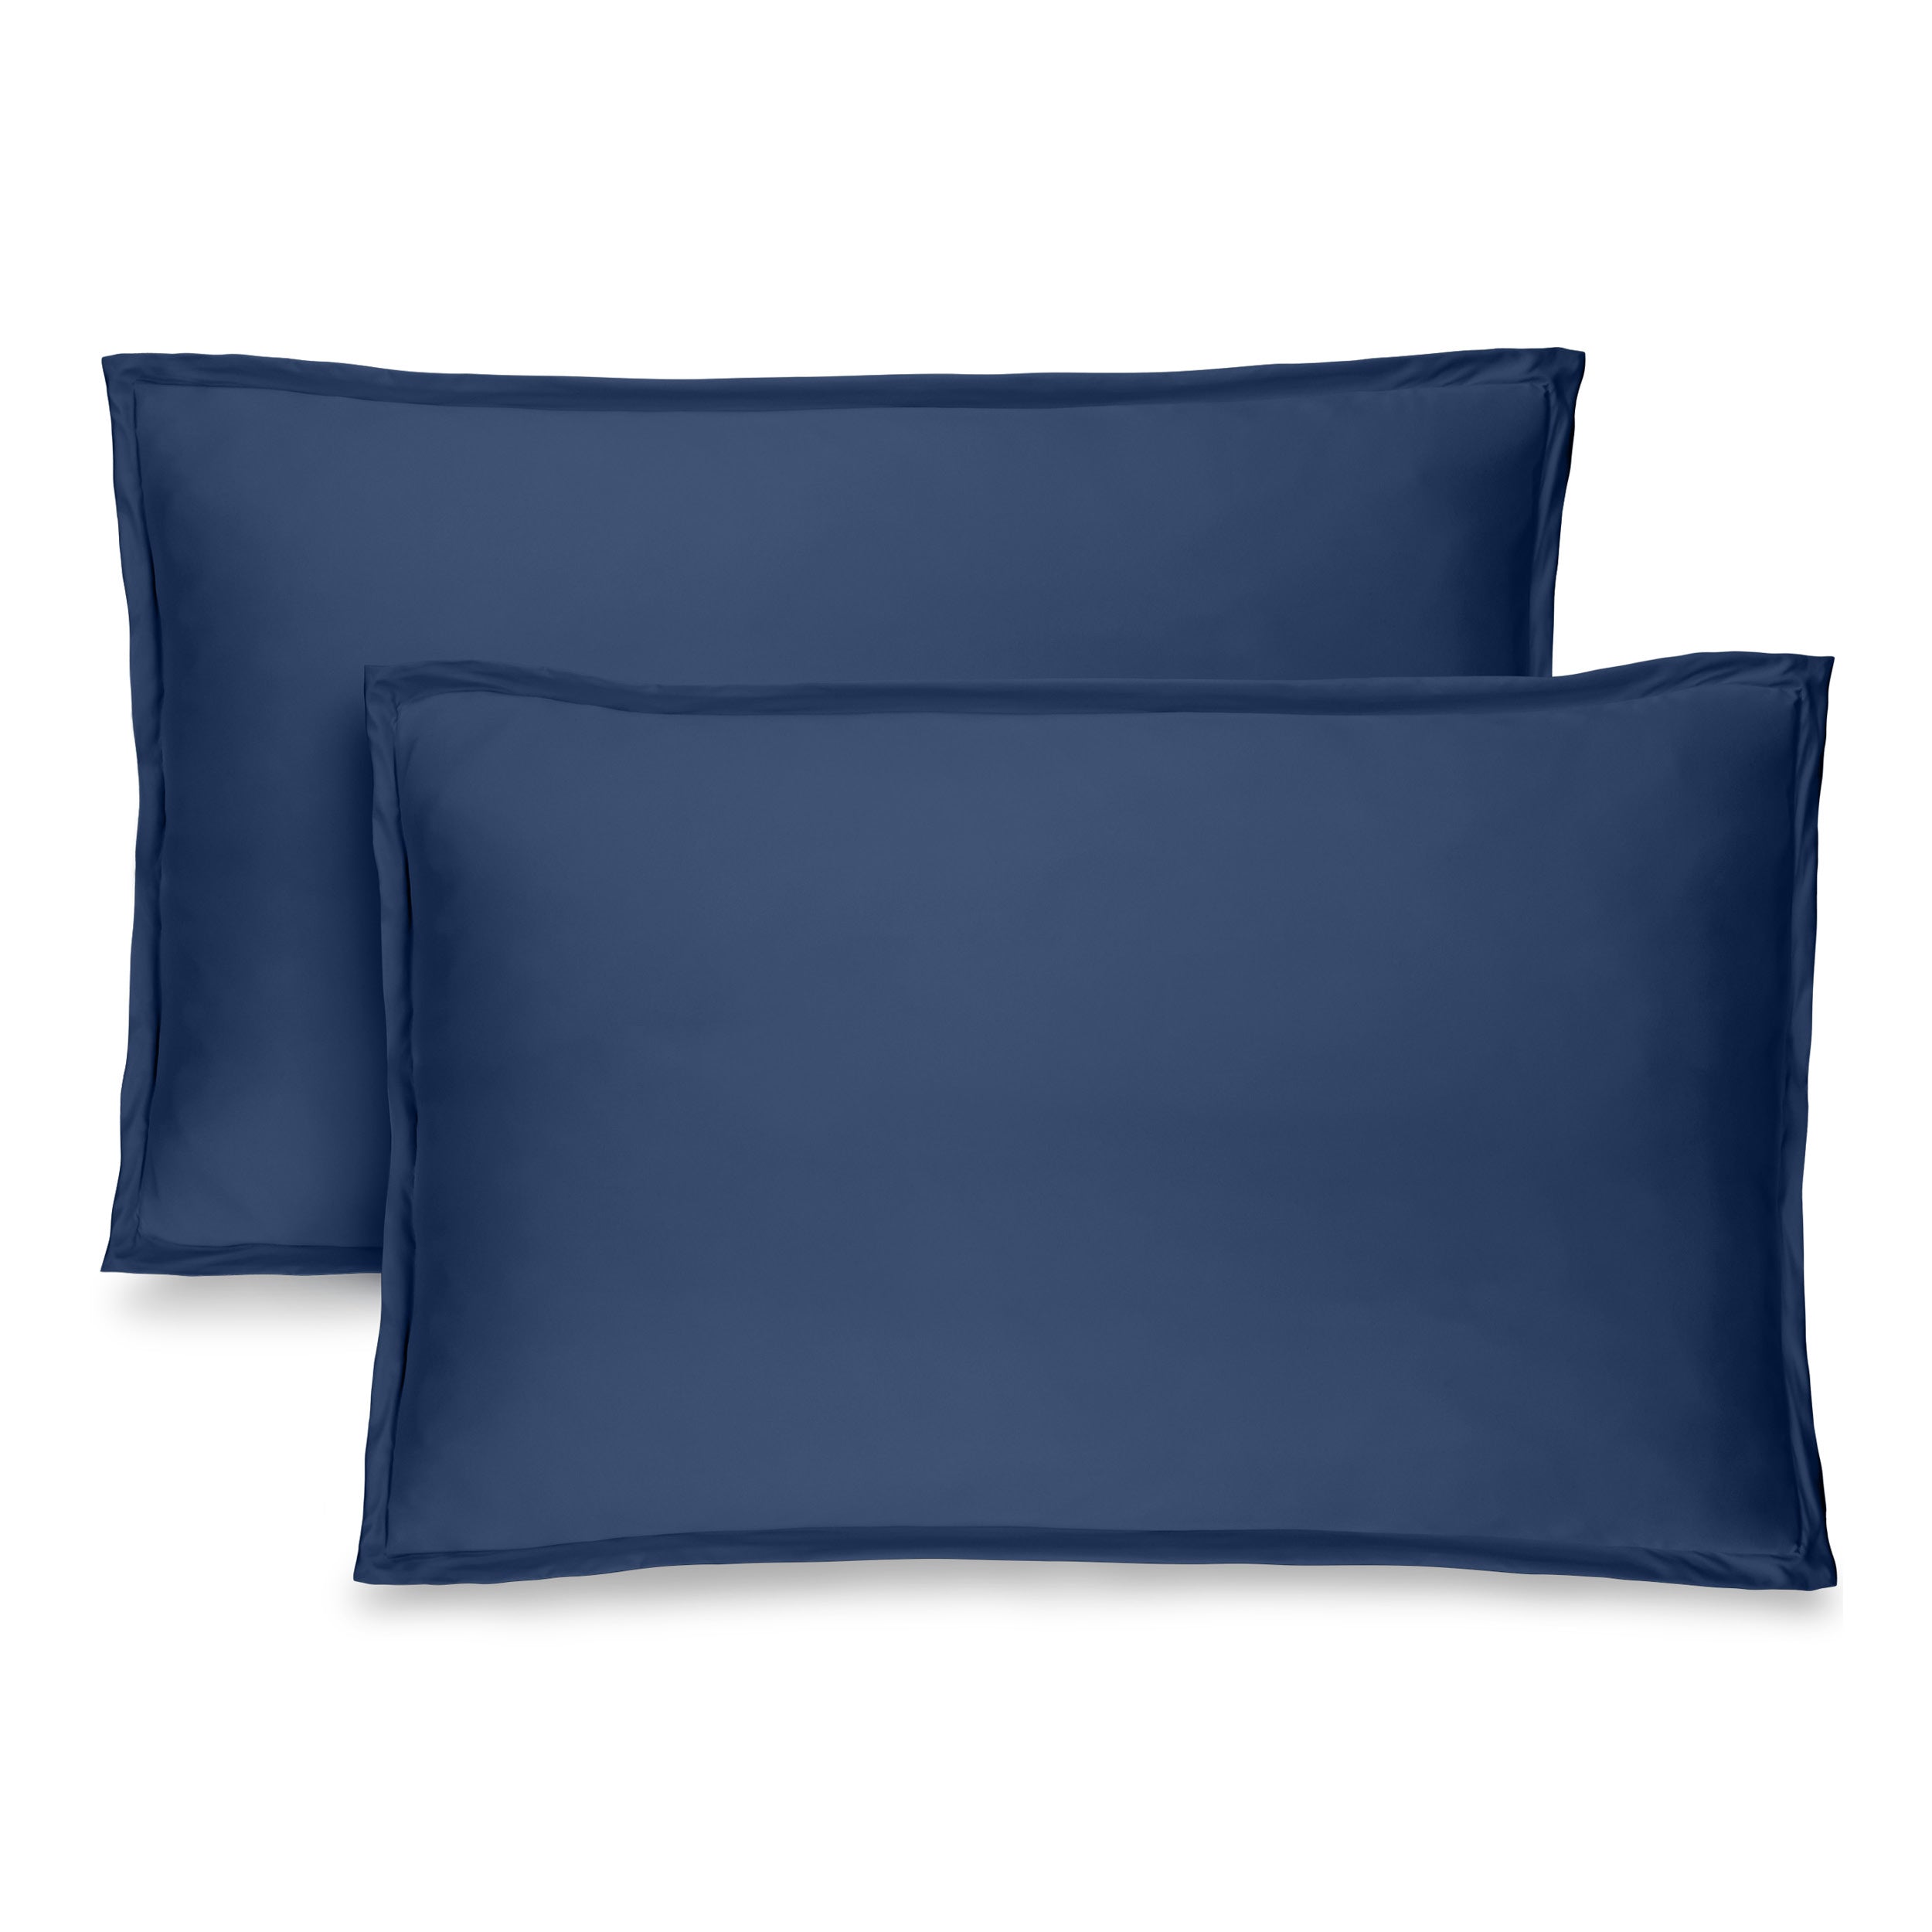 Two dark blue pillow shams on pillows standing up with one behind the other